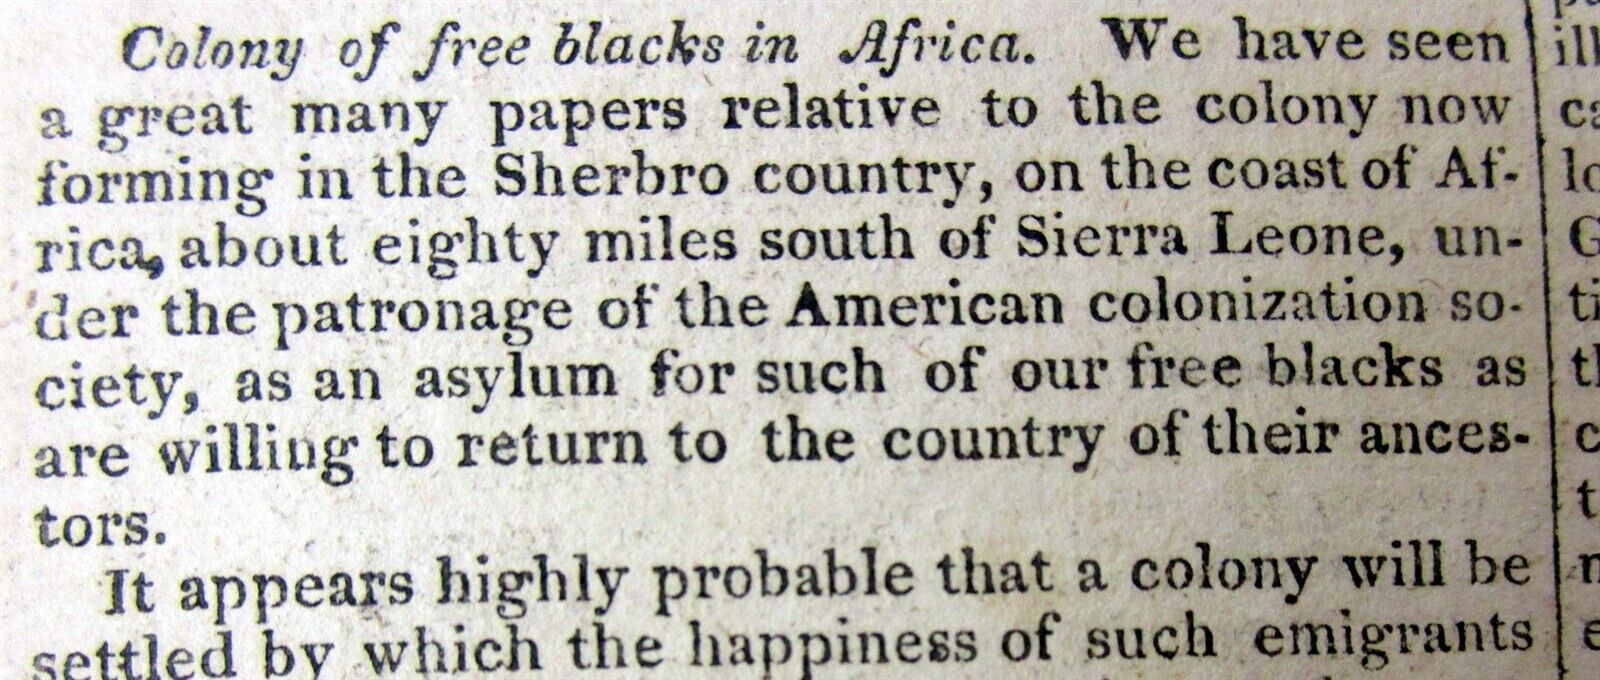 1820 newspaper wth Plan to send free SLAVES back to AFRICA & form a Black Colony